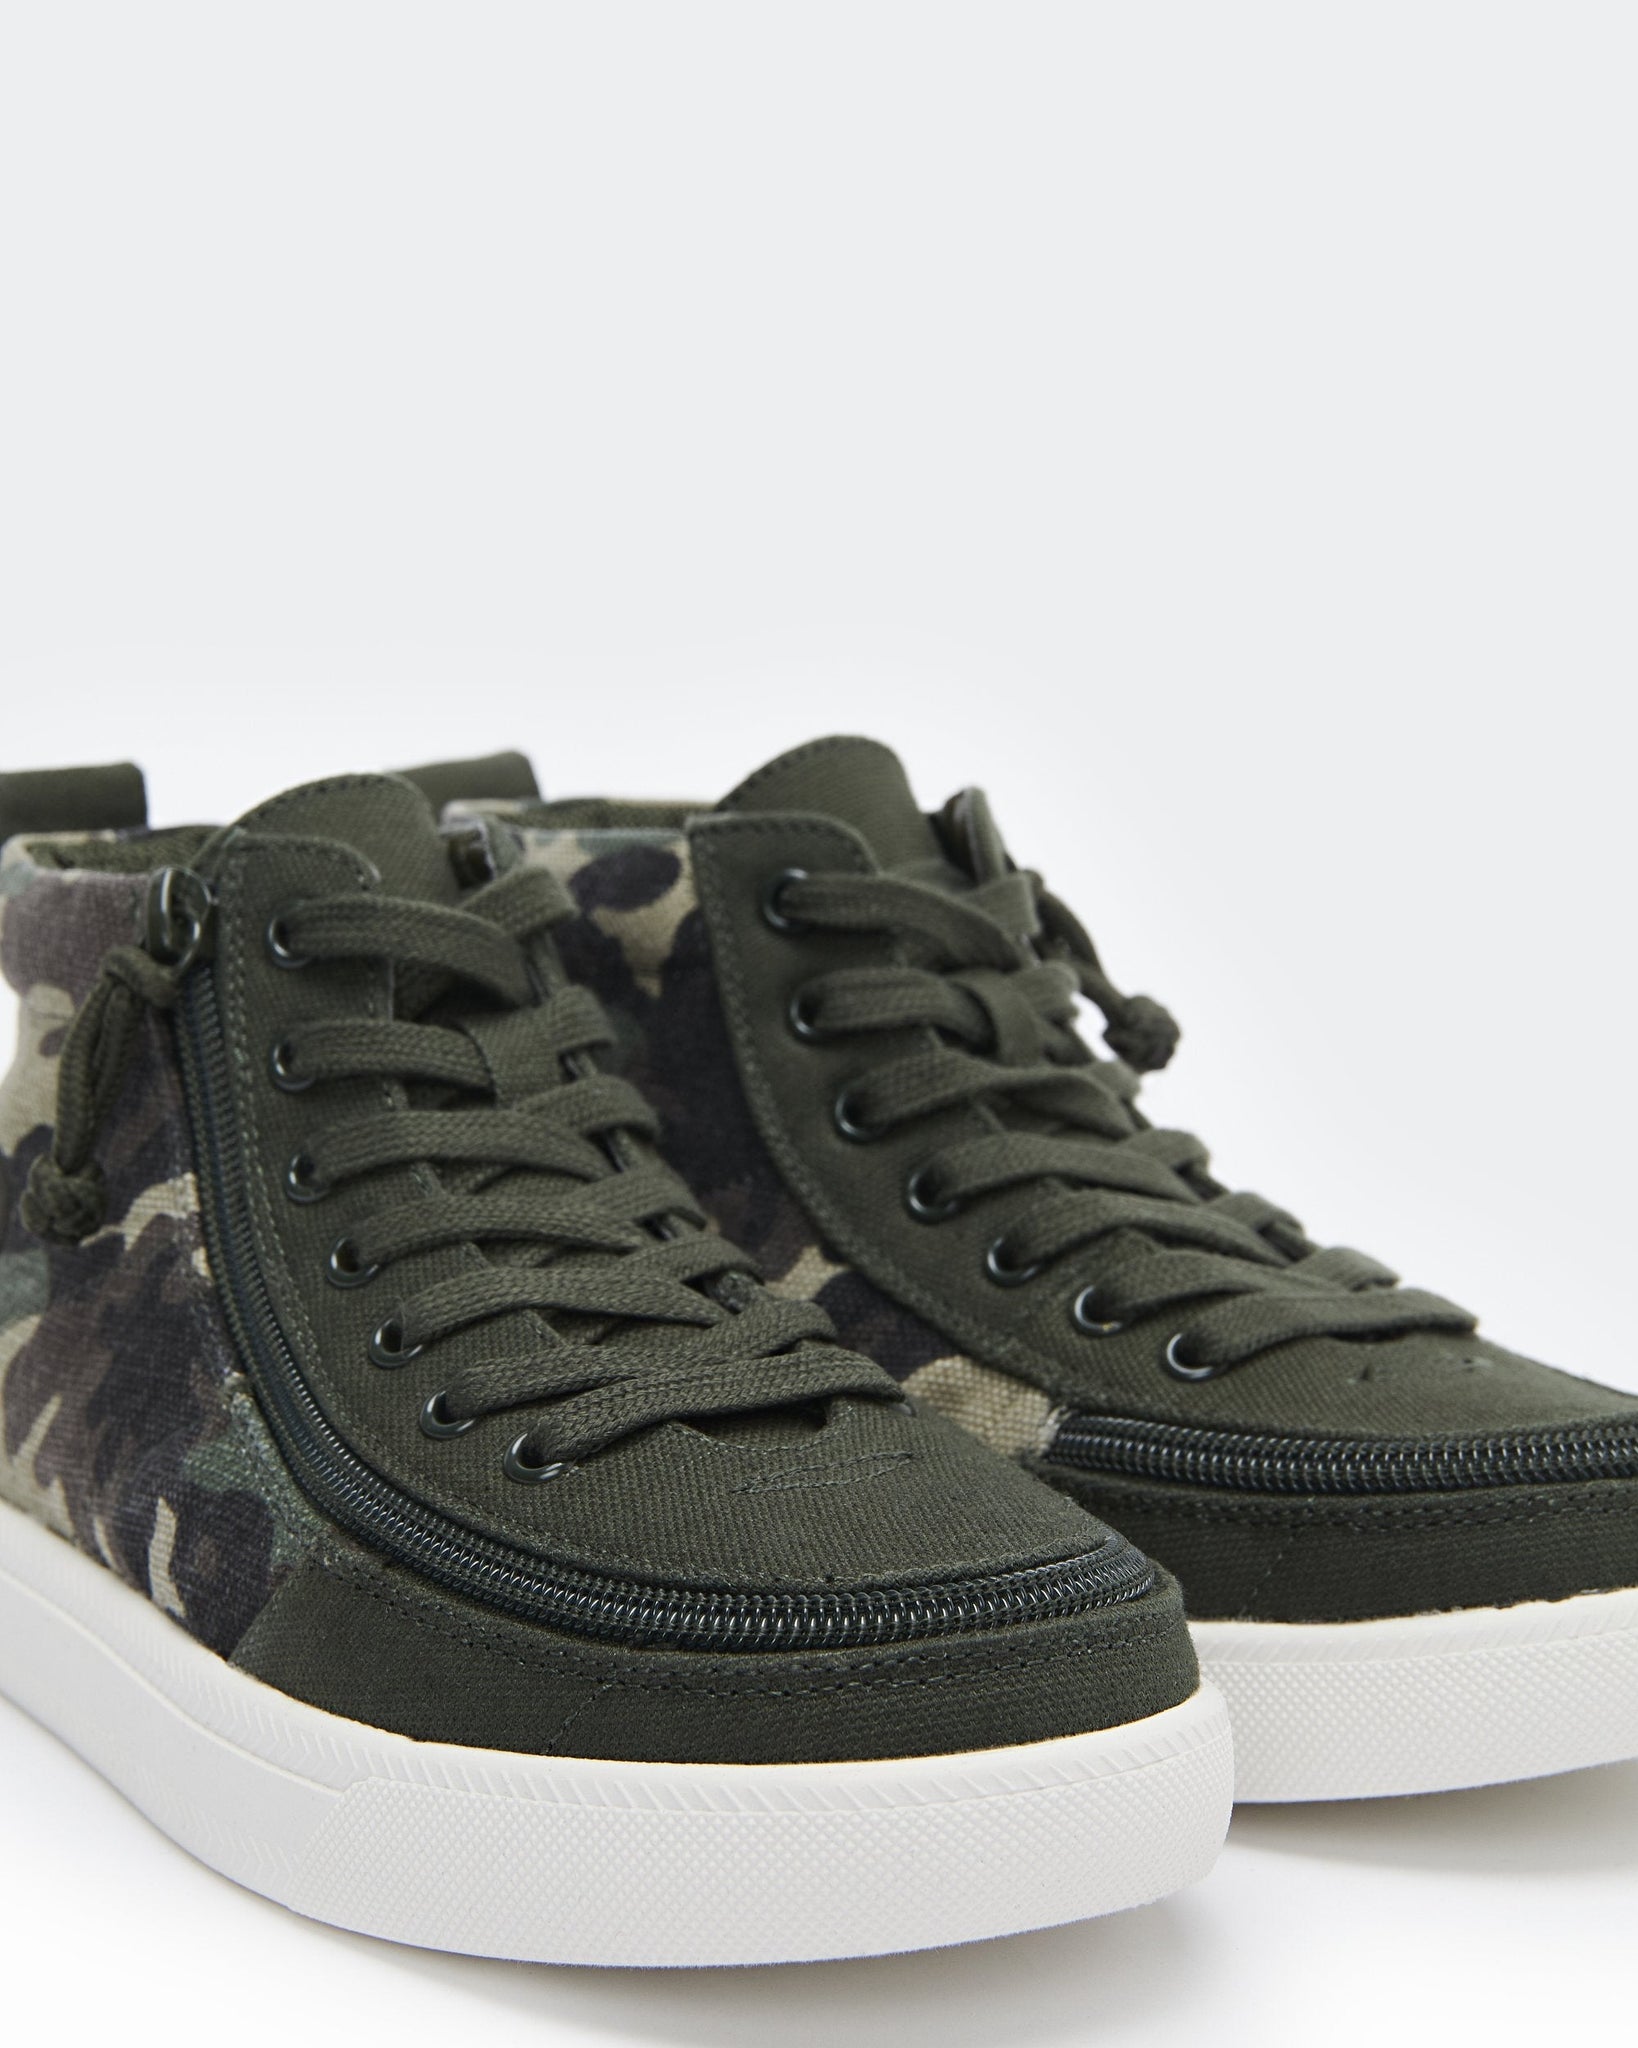 DR High Top (Kids) - Olive Camo